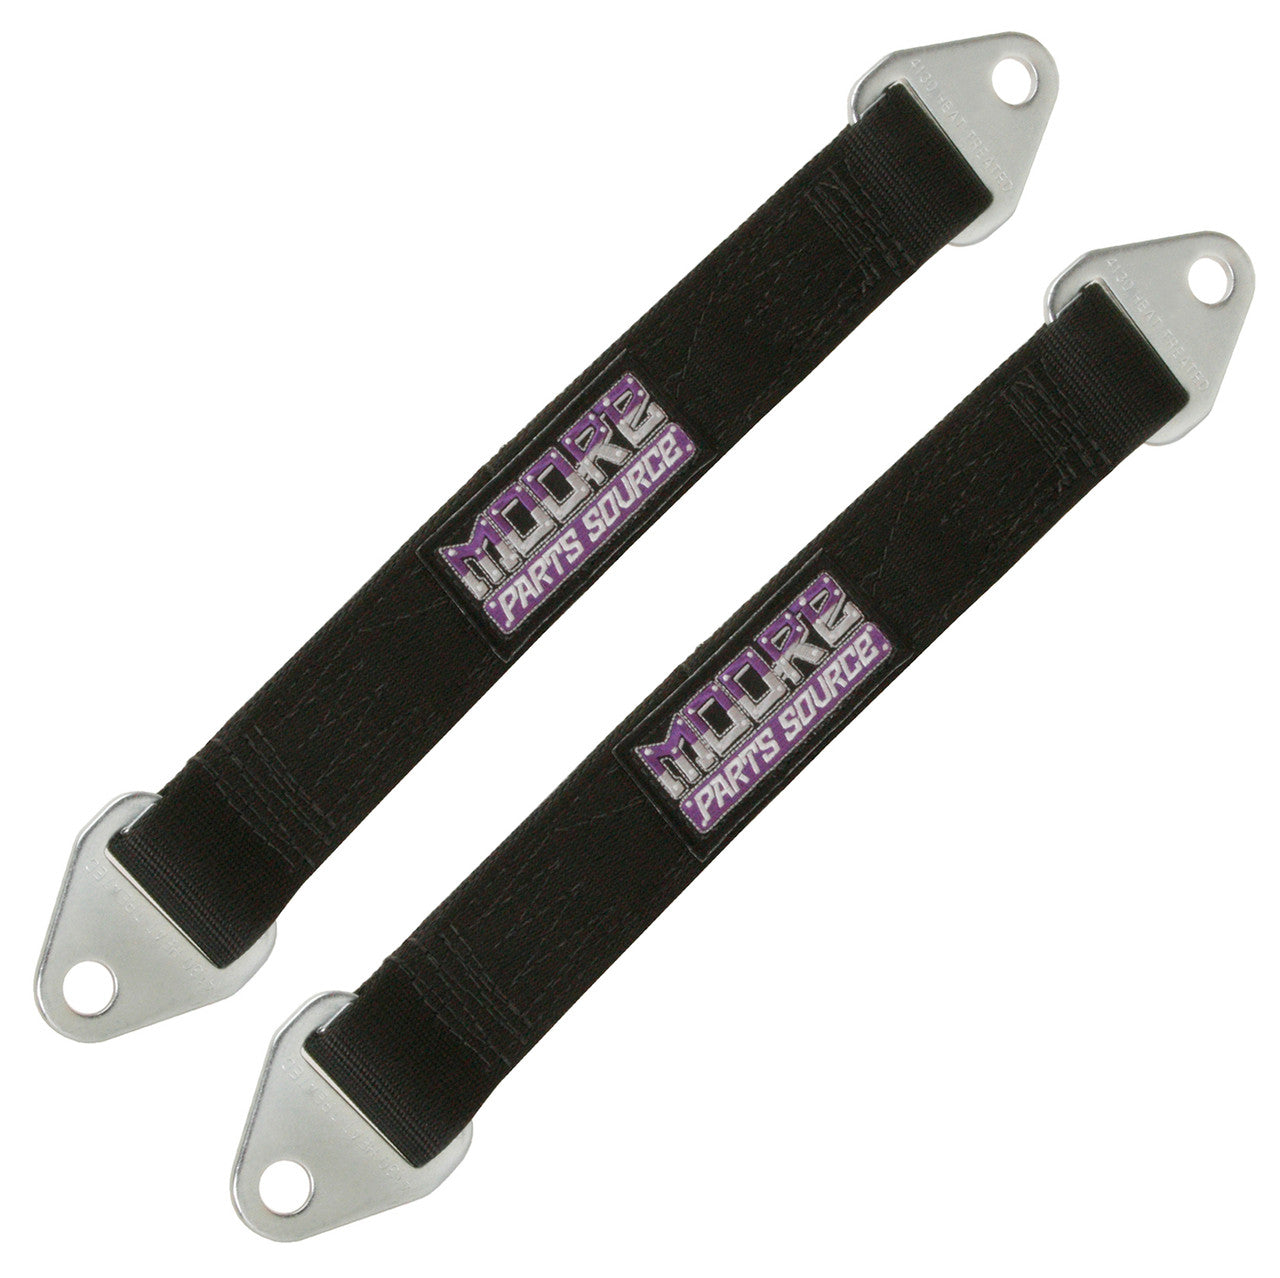 30 Inch USA Made Off-Road Suspension Limit Straps, Sold As Pair